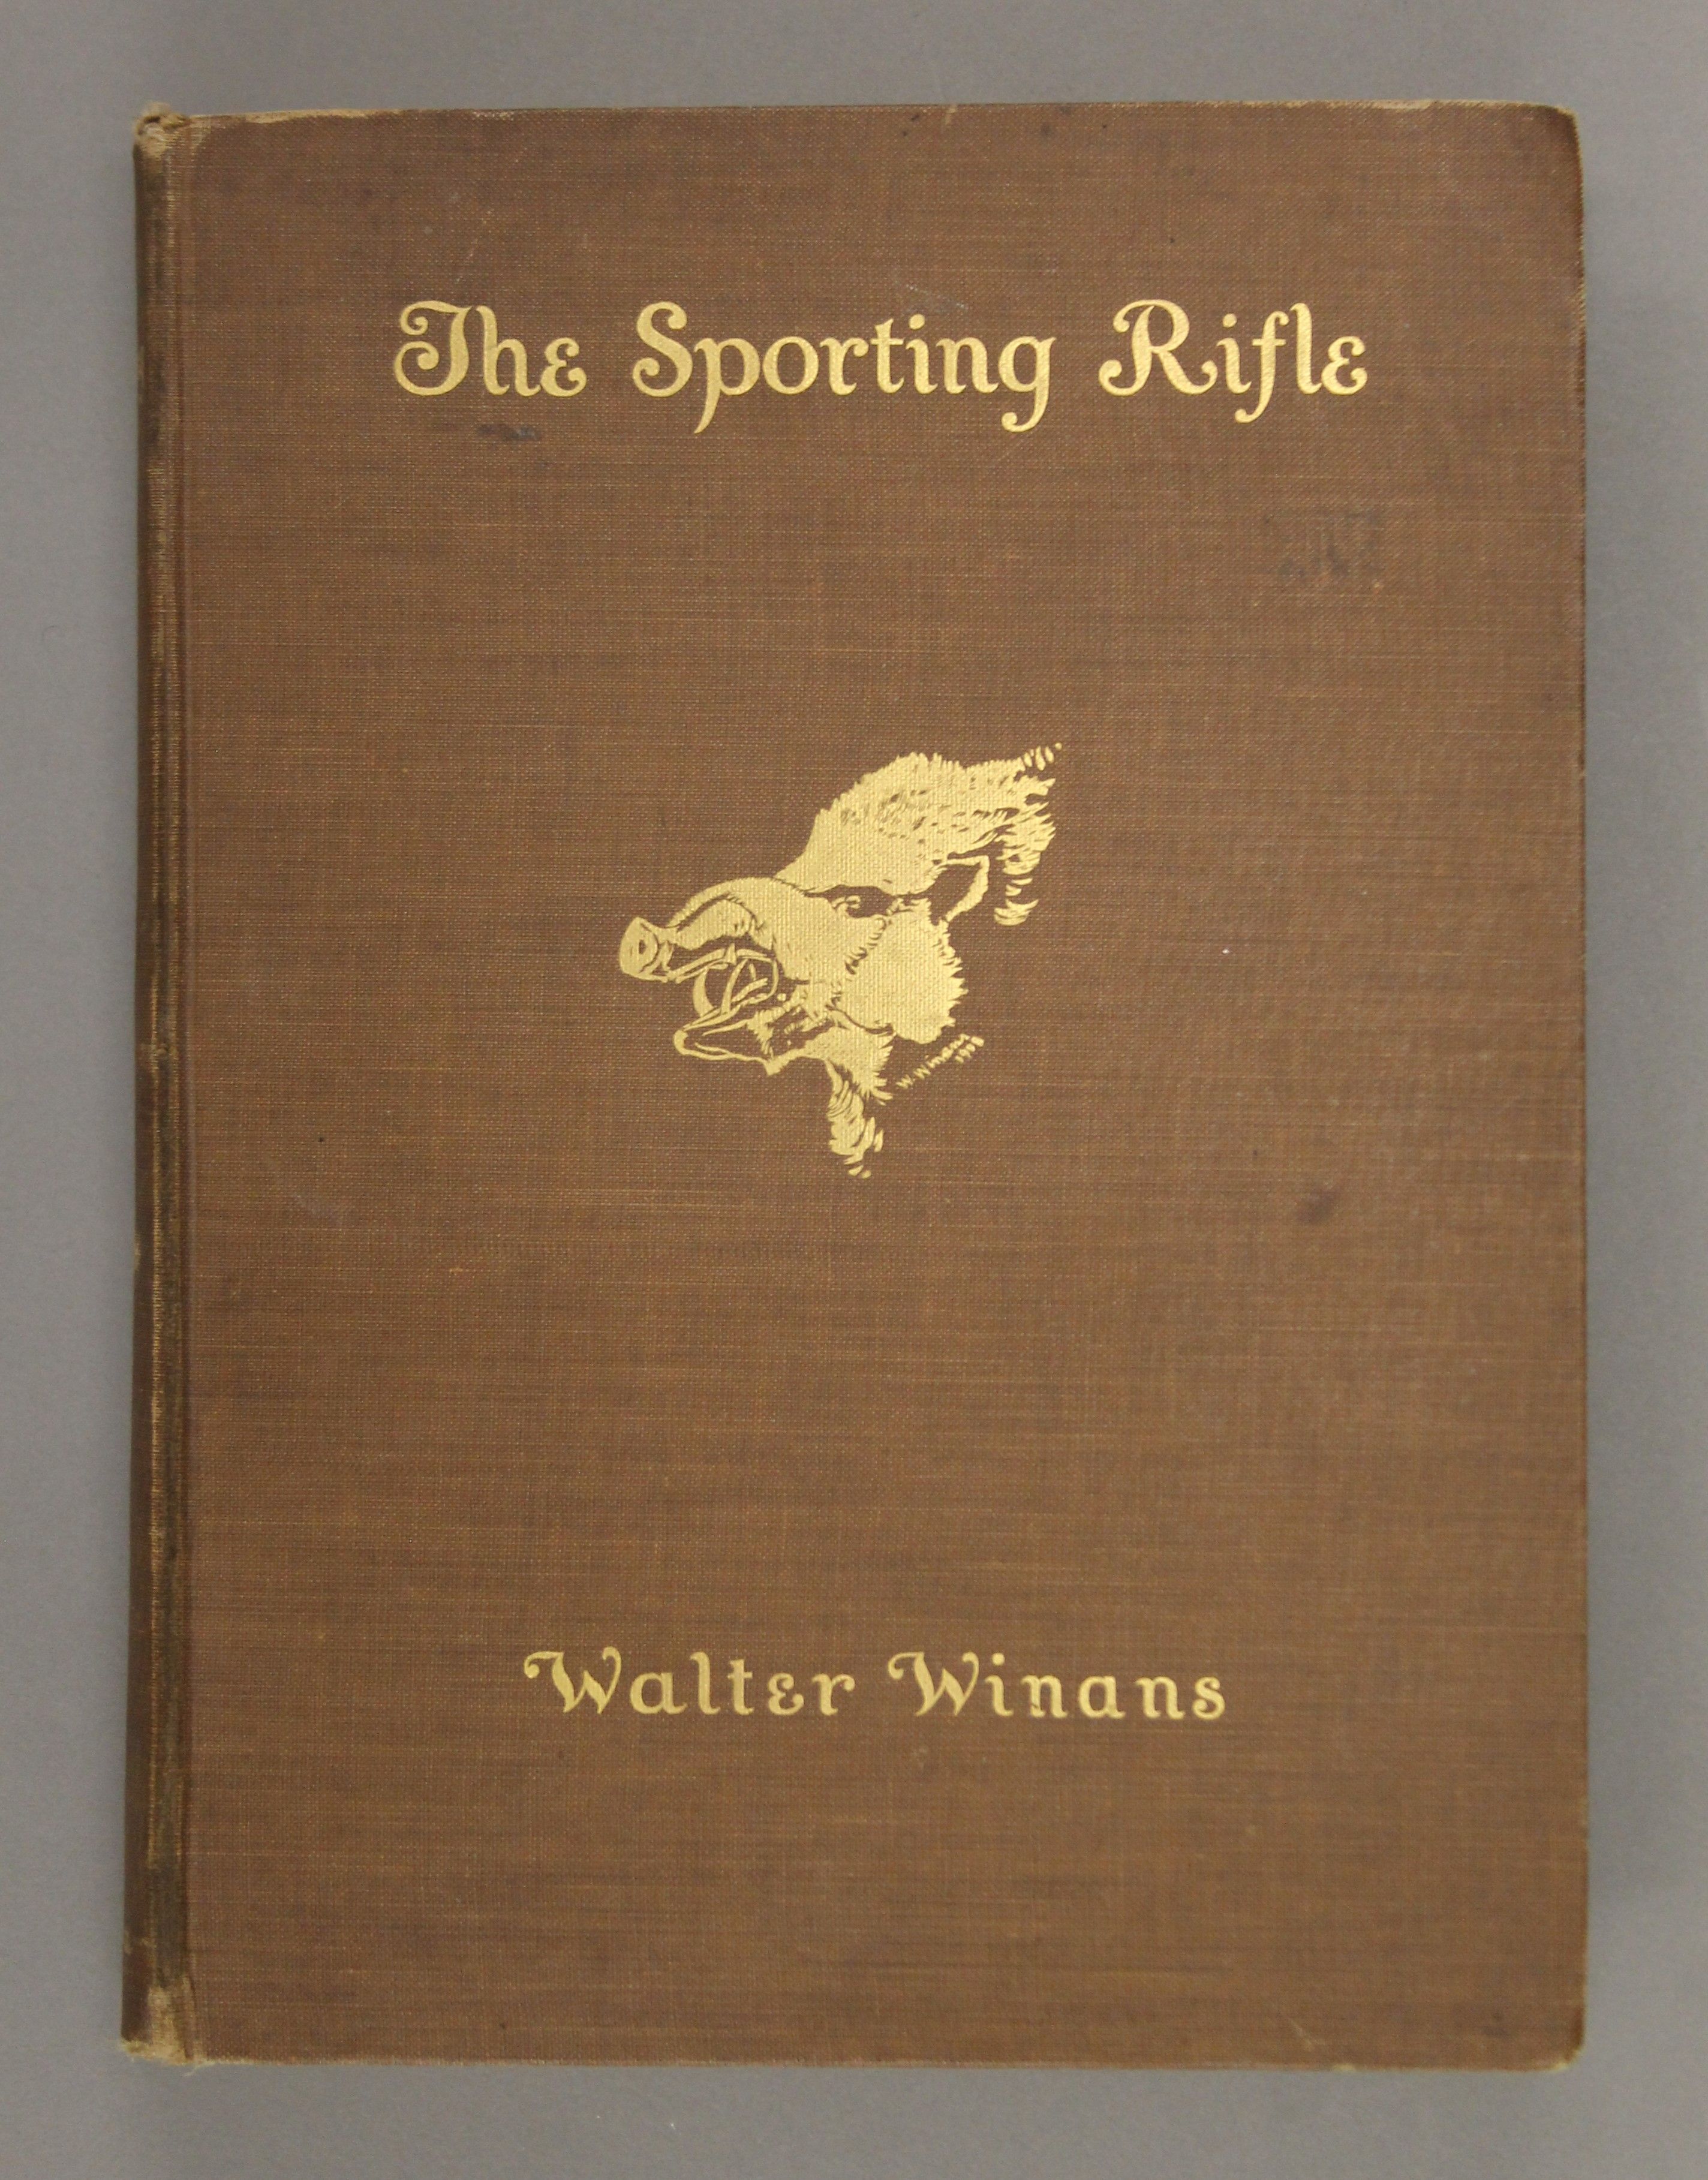 Walter Winans, The Sporting Rifle, 1908. - Image 2 of 6